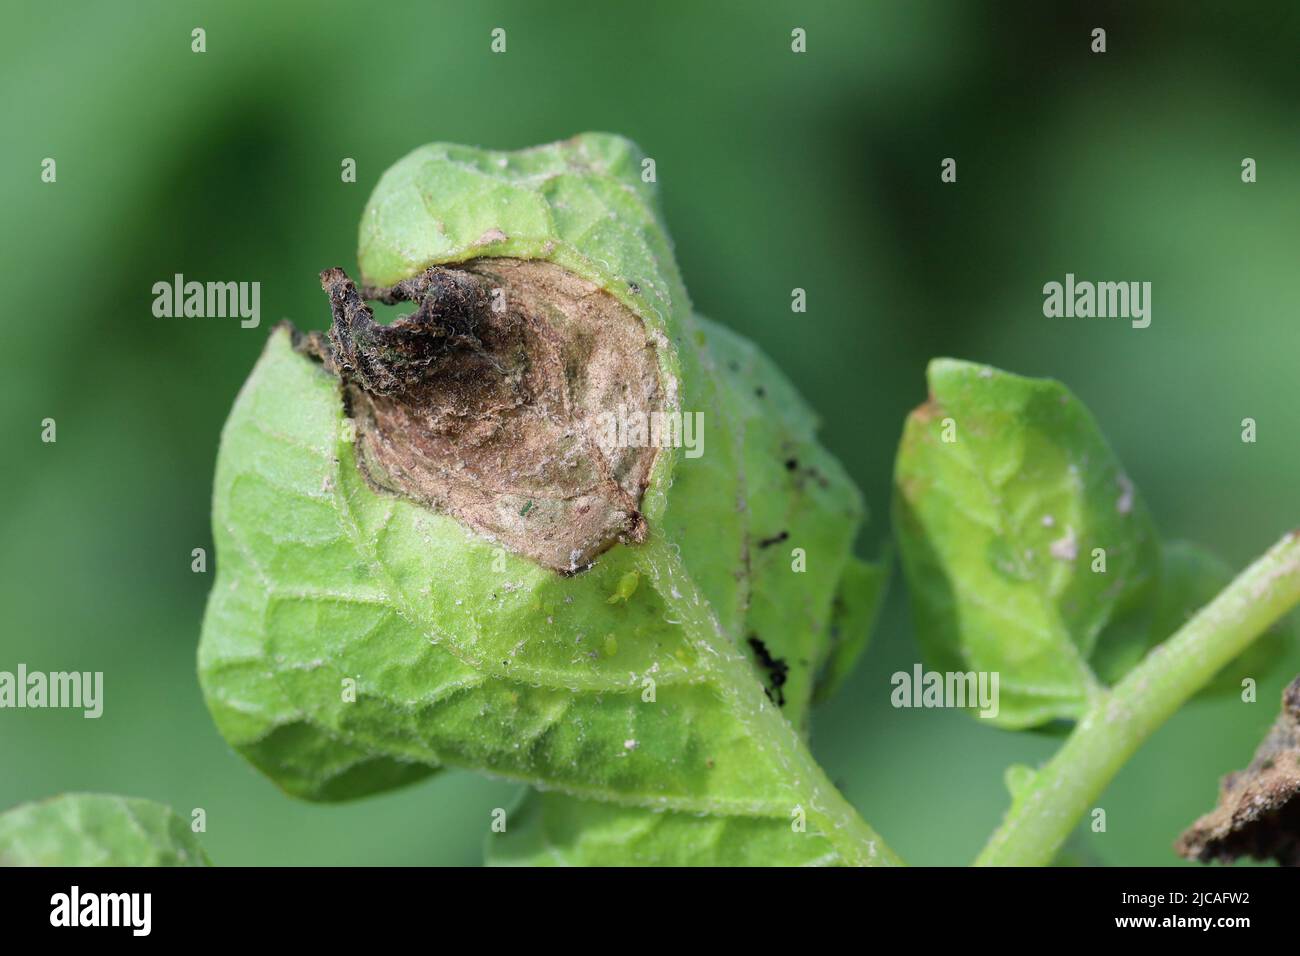 Potato late blight Phytophthora infestans infection focus in potato crop Stock Photo